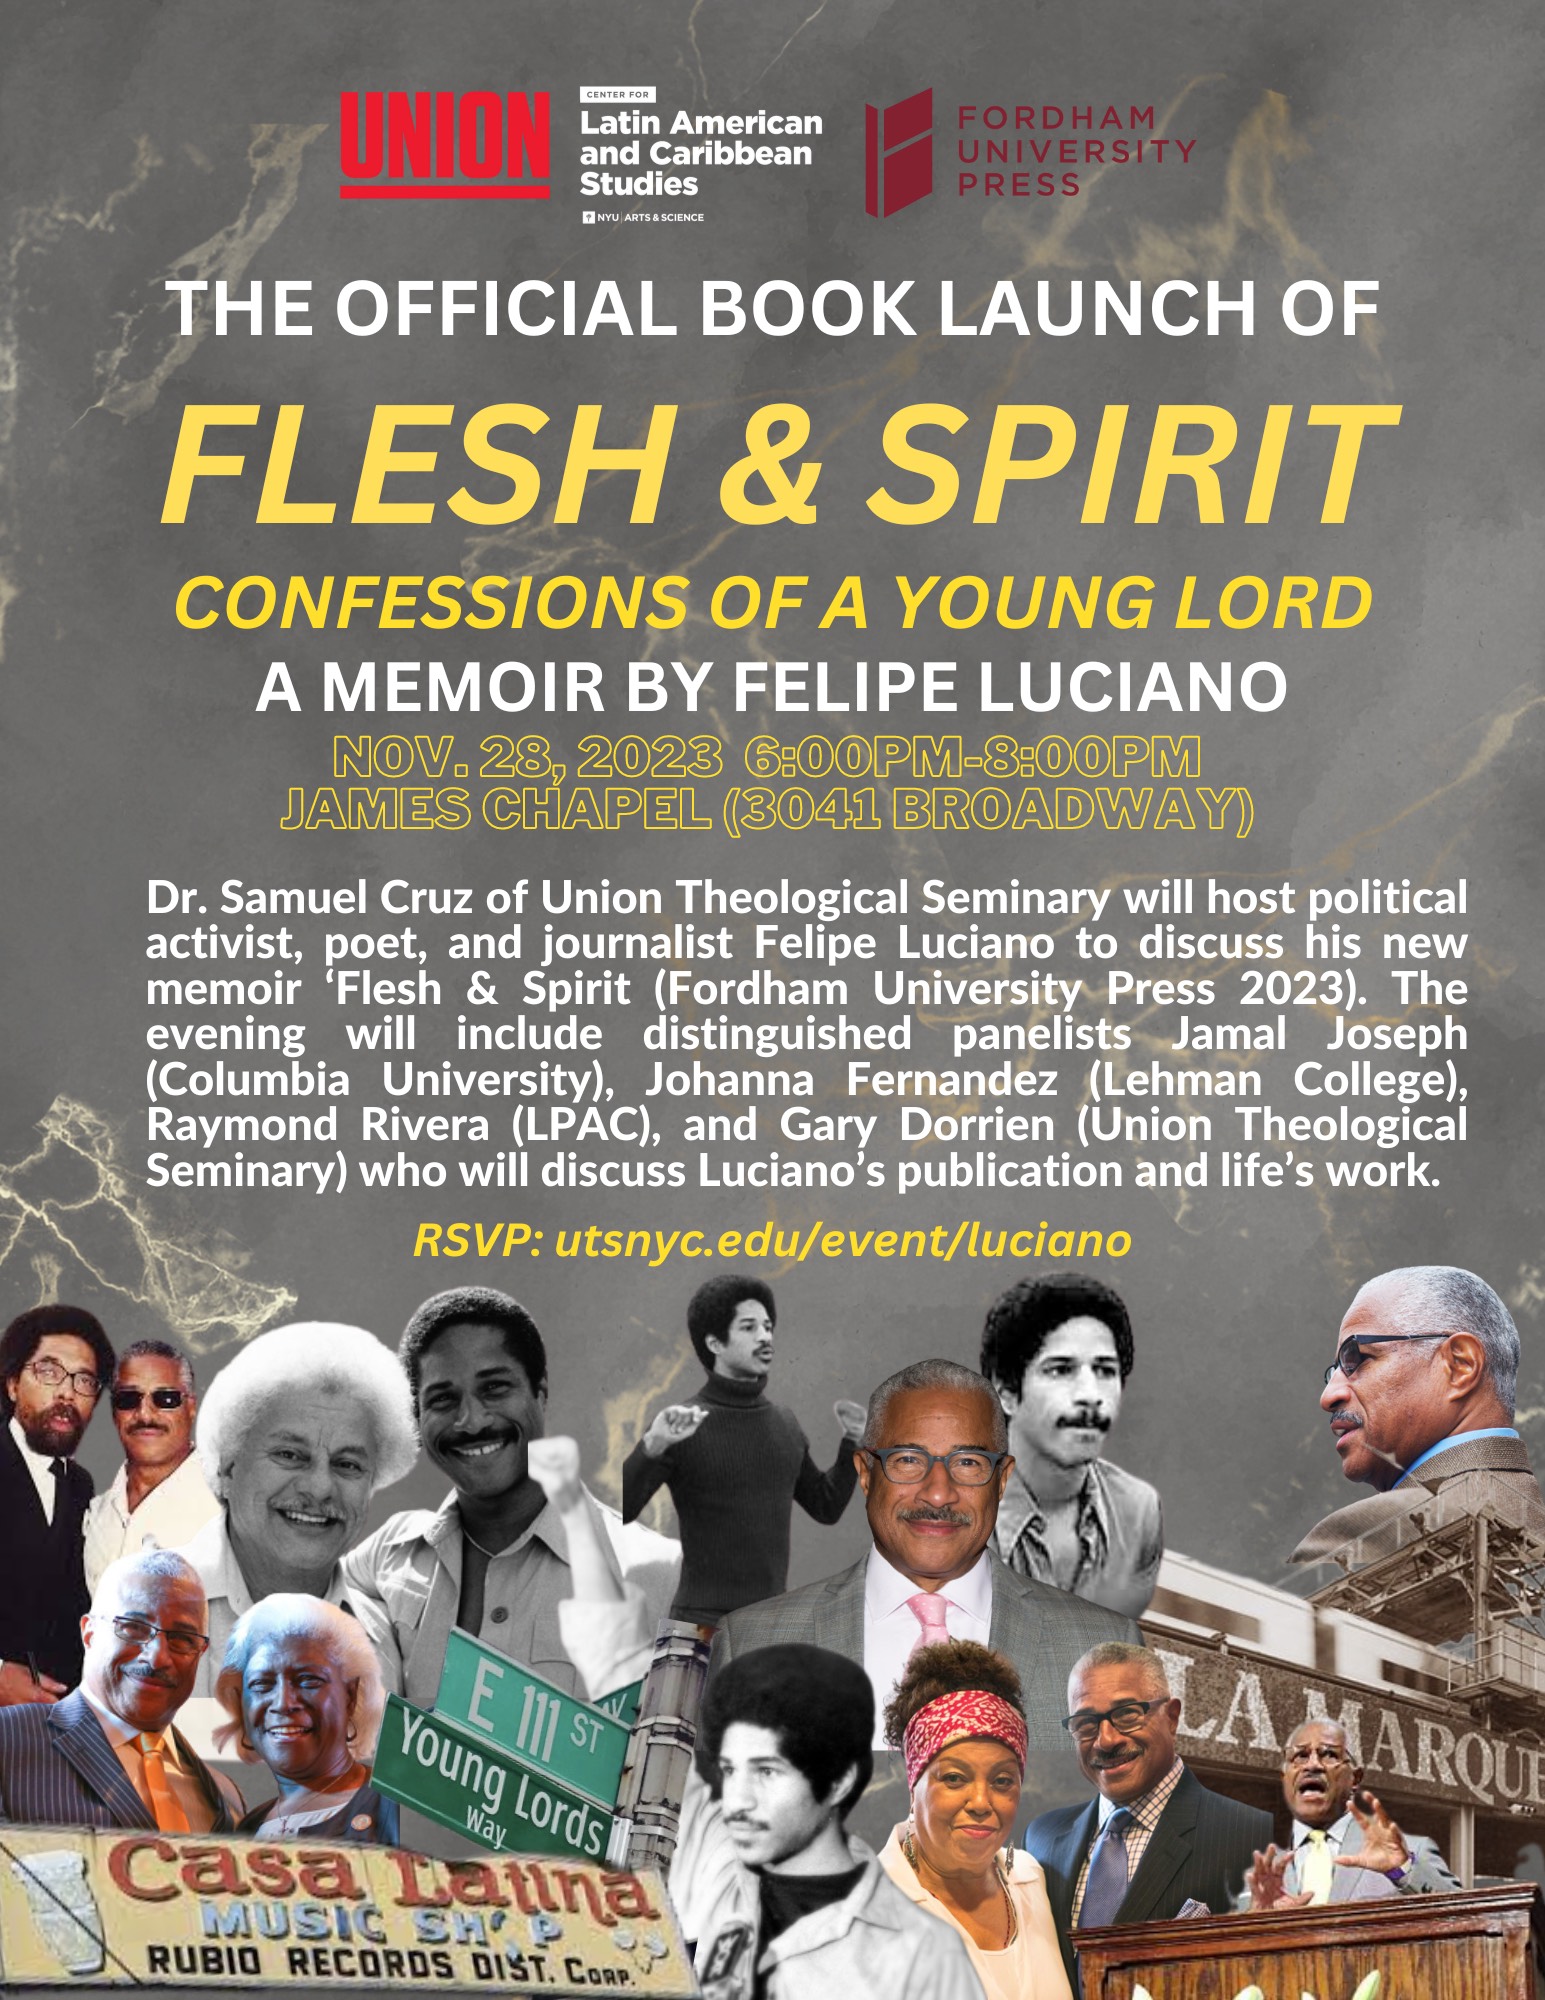 The Official Book Launch of "Flesh and Spirit: Confessions of a Young Lord" A Memoir by Felipe Luciano @ Union Theological Seminary - James Chapel | New York | New York | United States